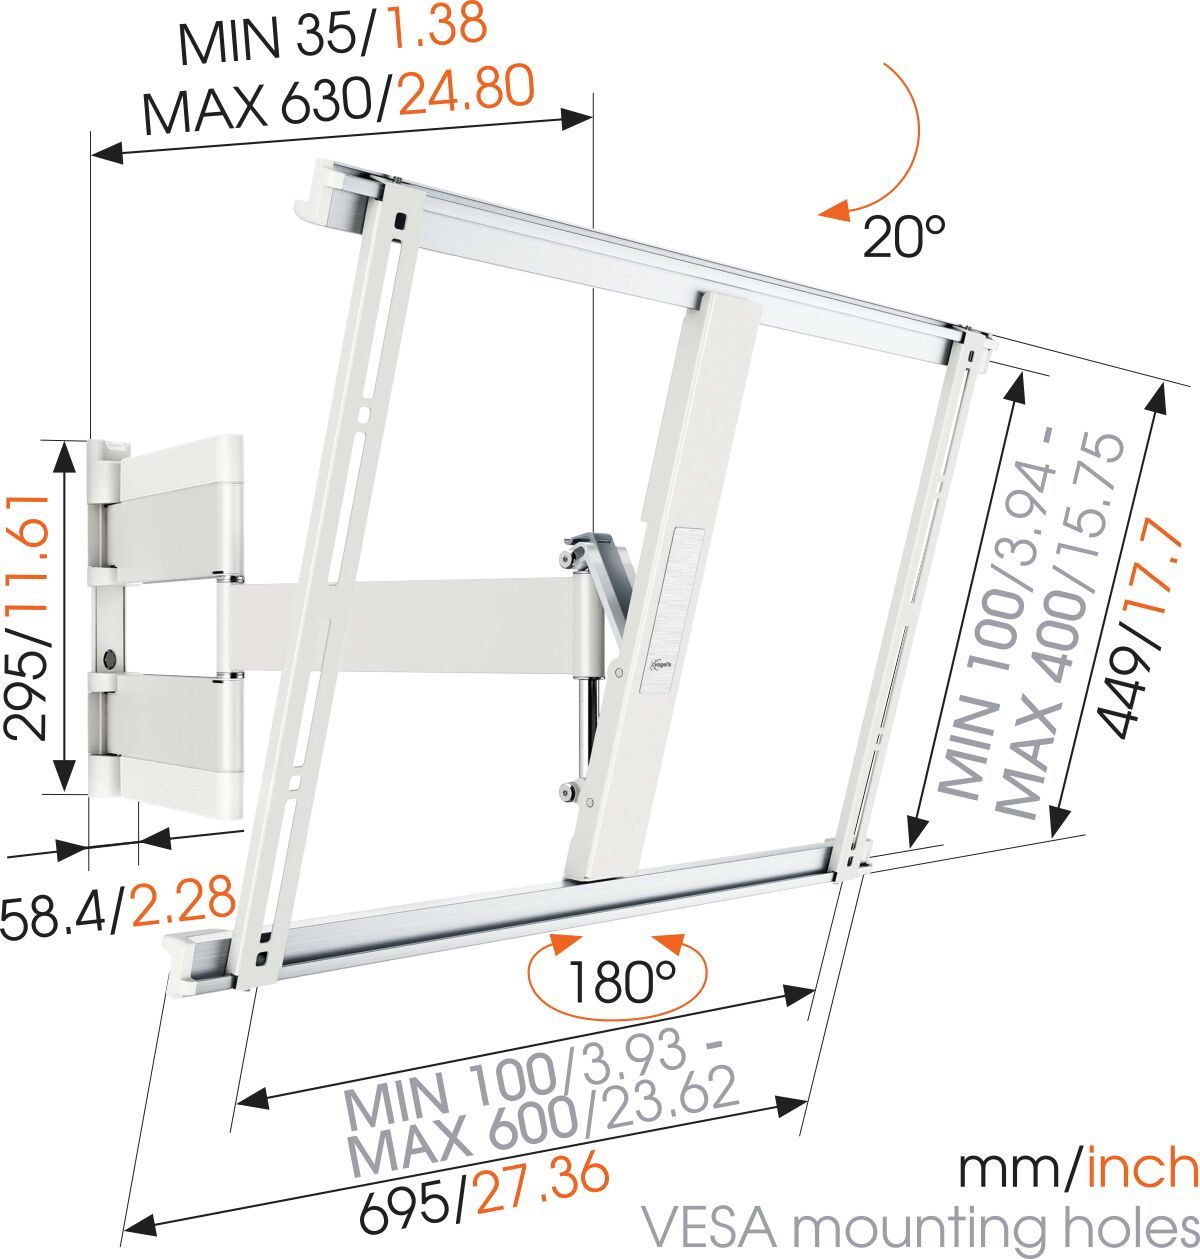 Vogel's THIN 545 ExtraThin Full-Motion TV Wall Mount (white) - Suitable for 40 up to 65 inch TVs - Full motion (up to 180°) - Tilt up to 20° - Dimensions